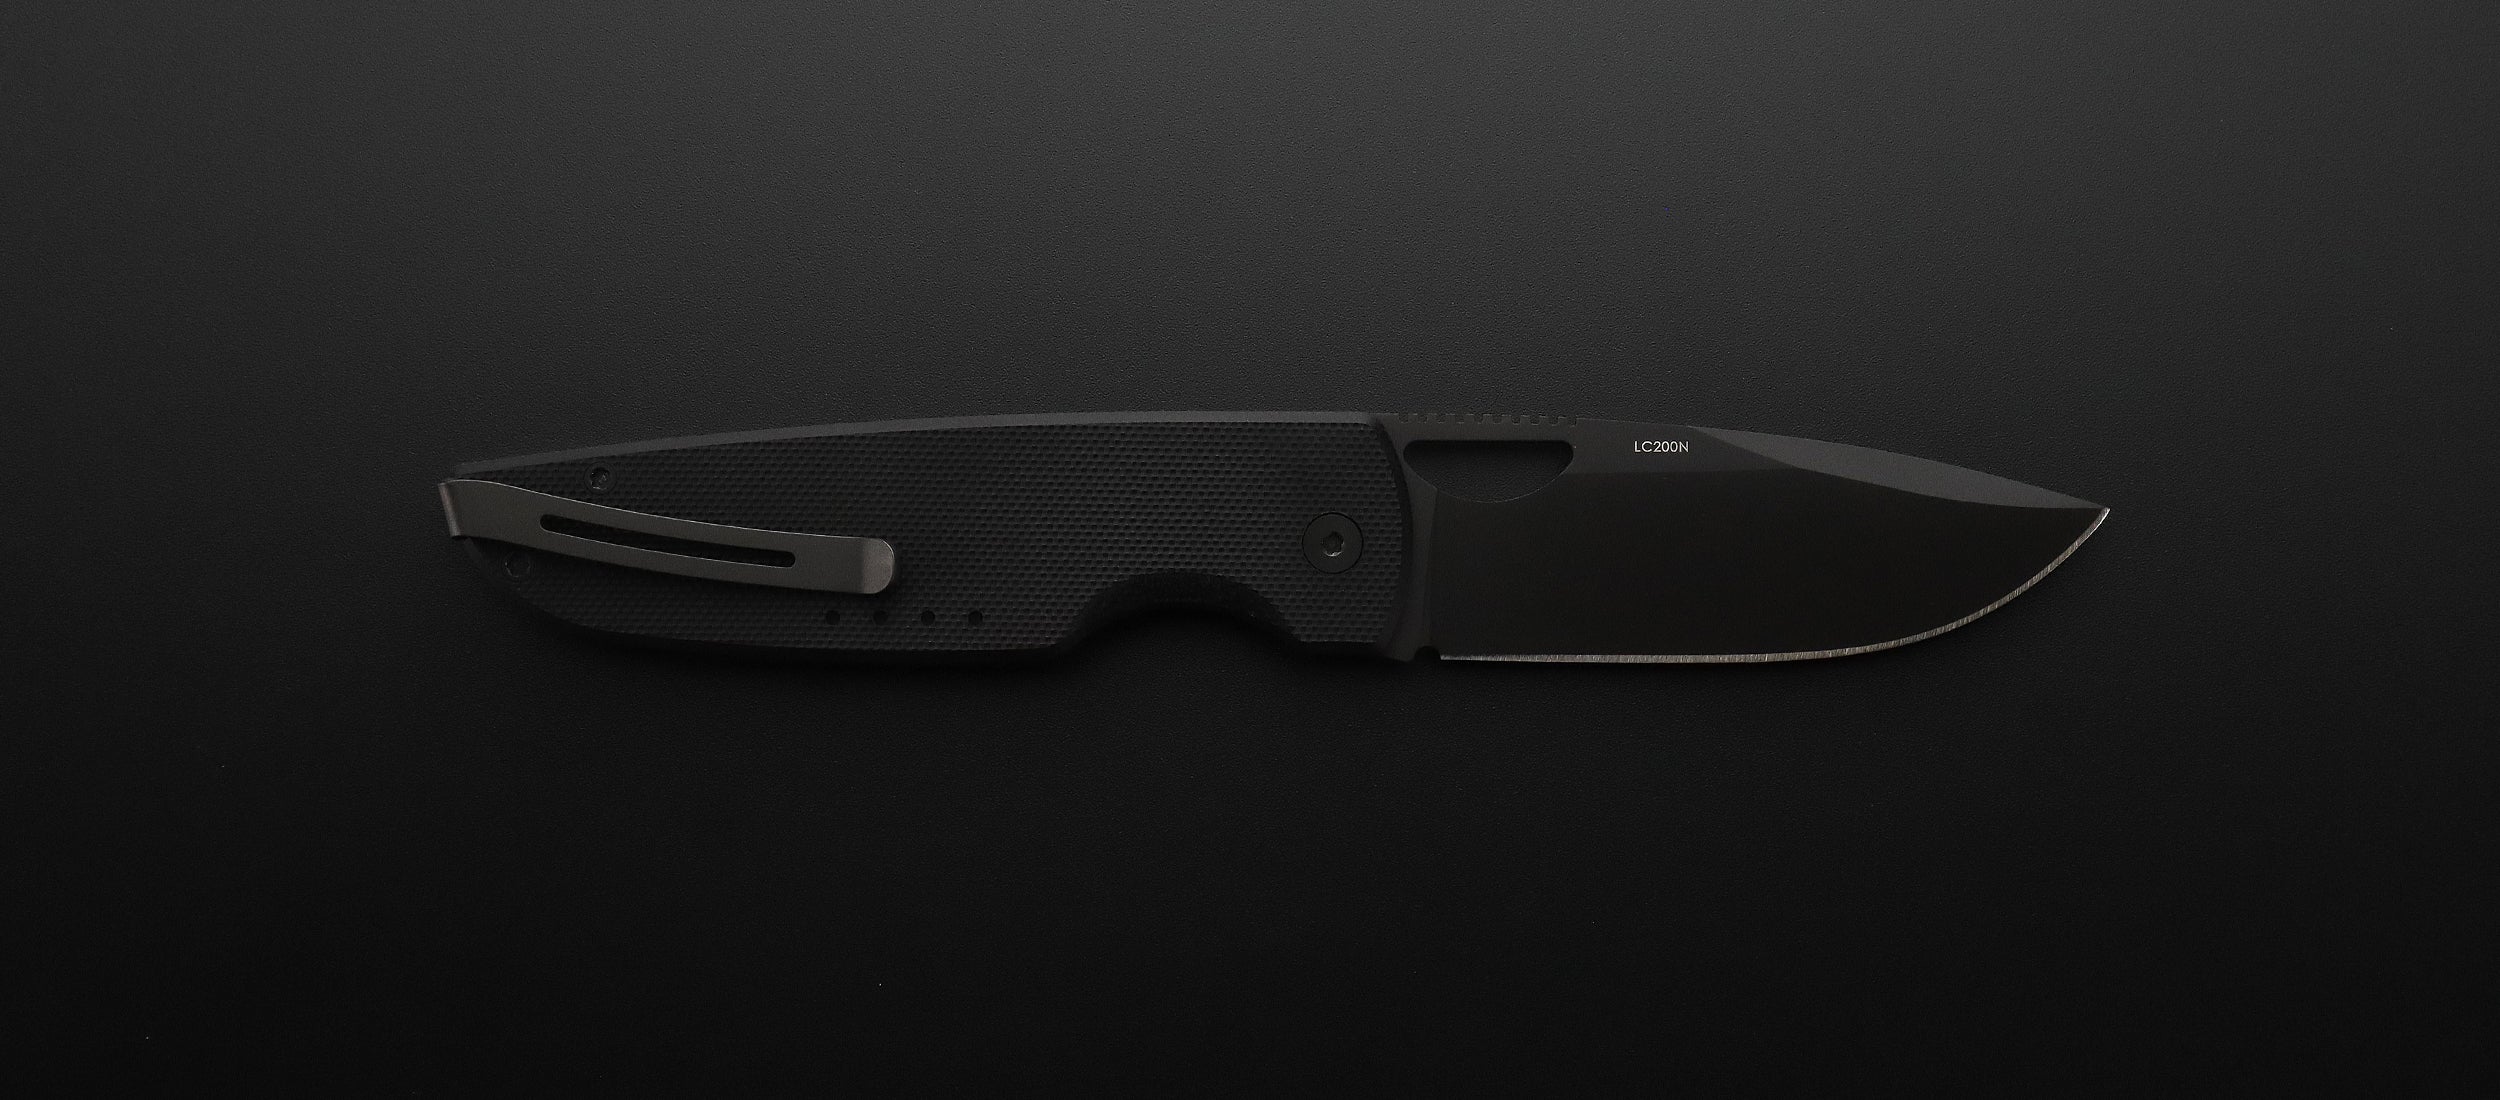 The Chase Black PVD G10 LC200N - Quiet Carry